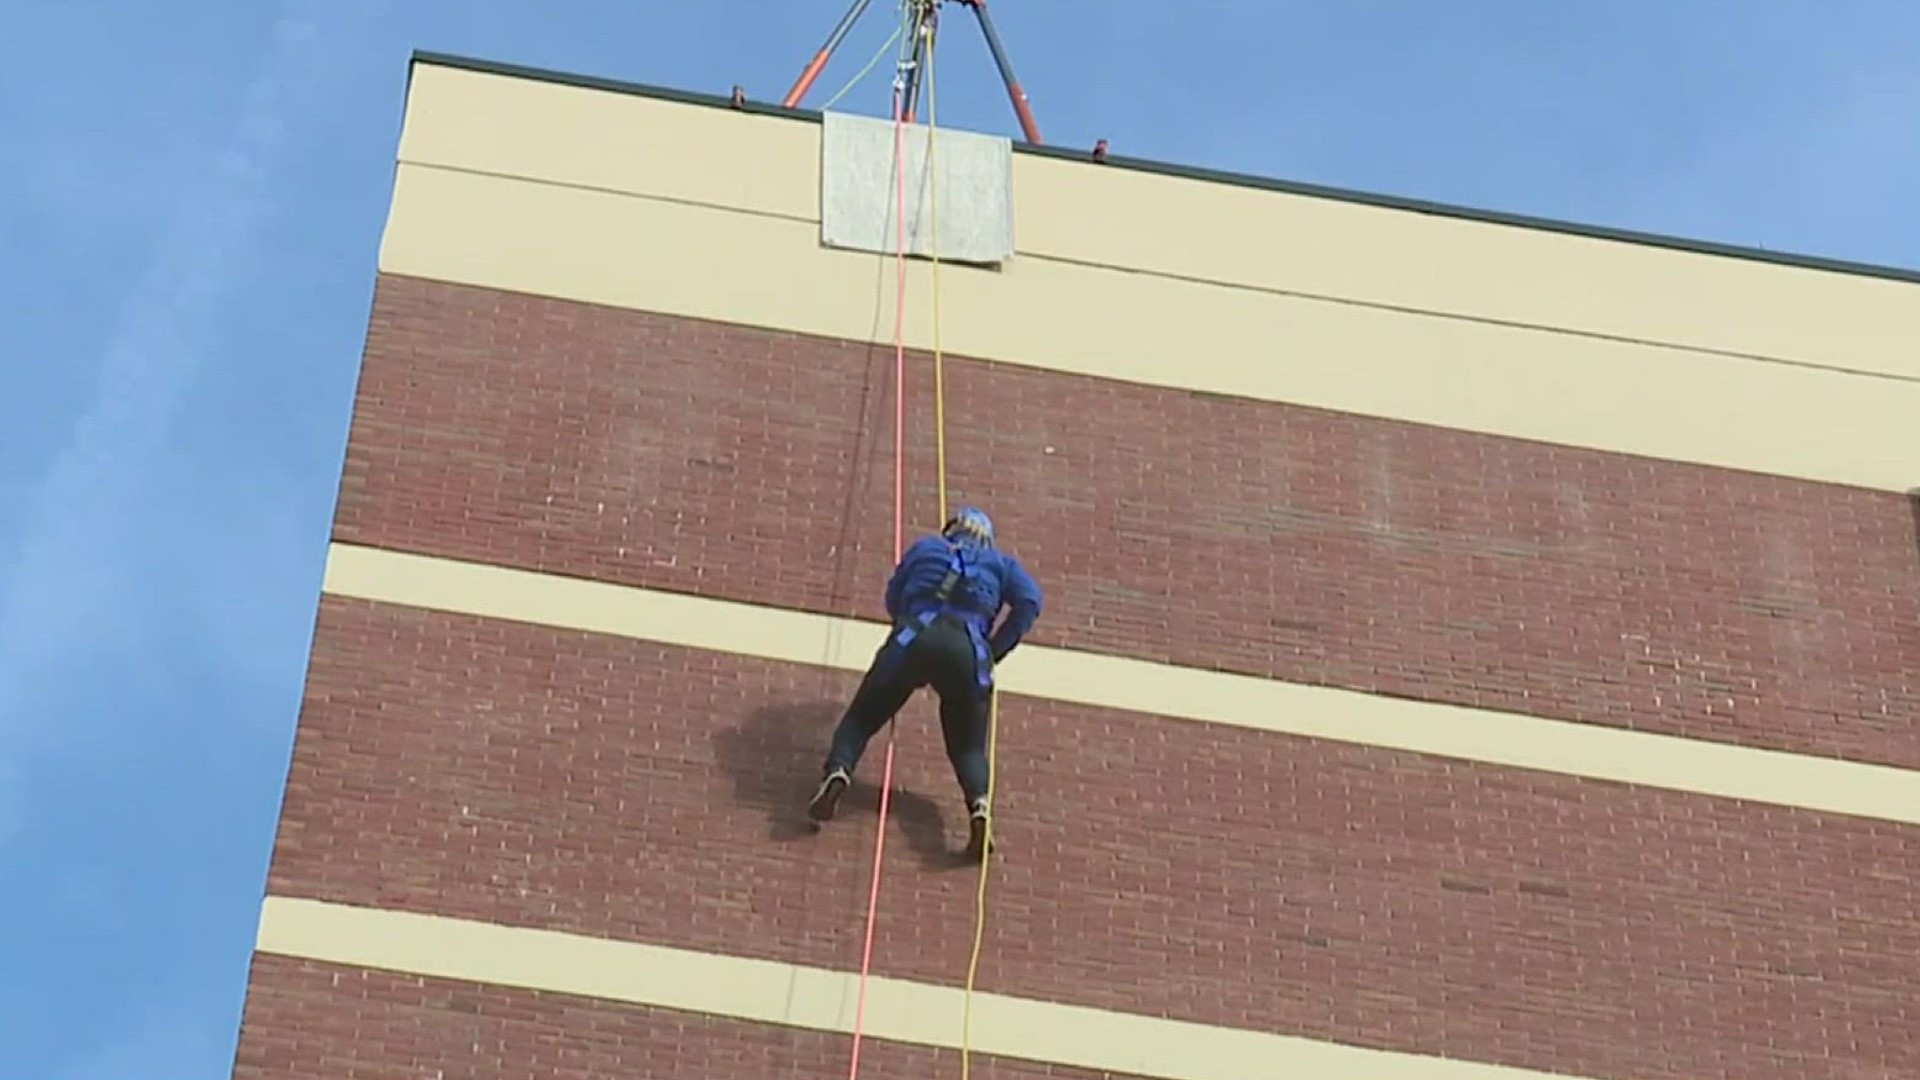 VisionCorps, a local nonprofit that provides services to the blind and visually impaired, is raising money today by rappelling down a 10-story building.